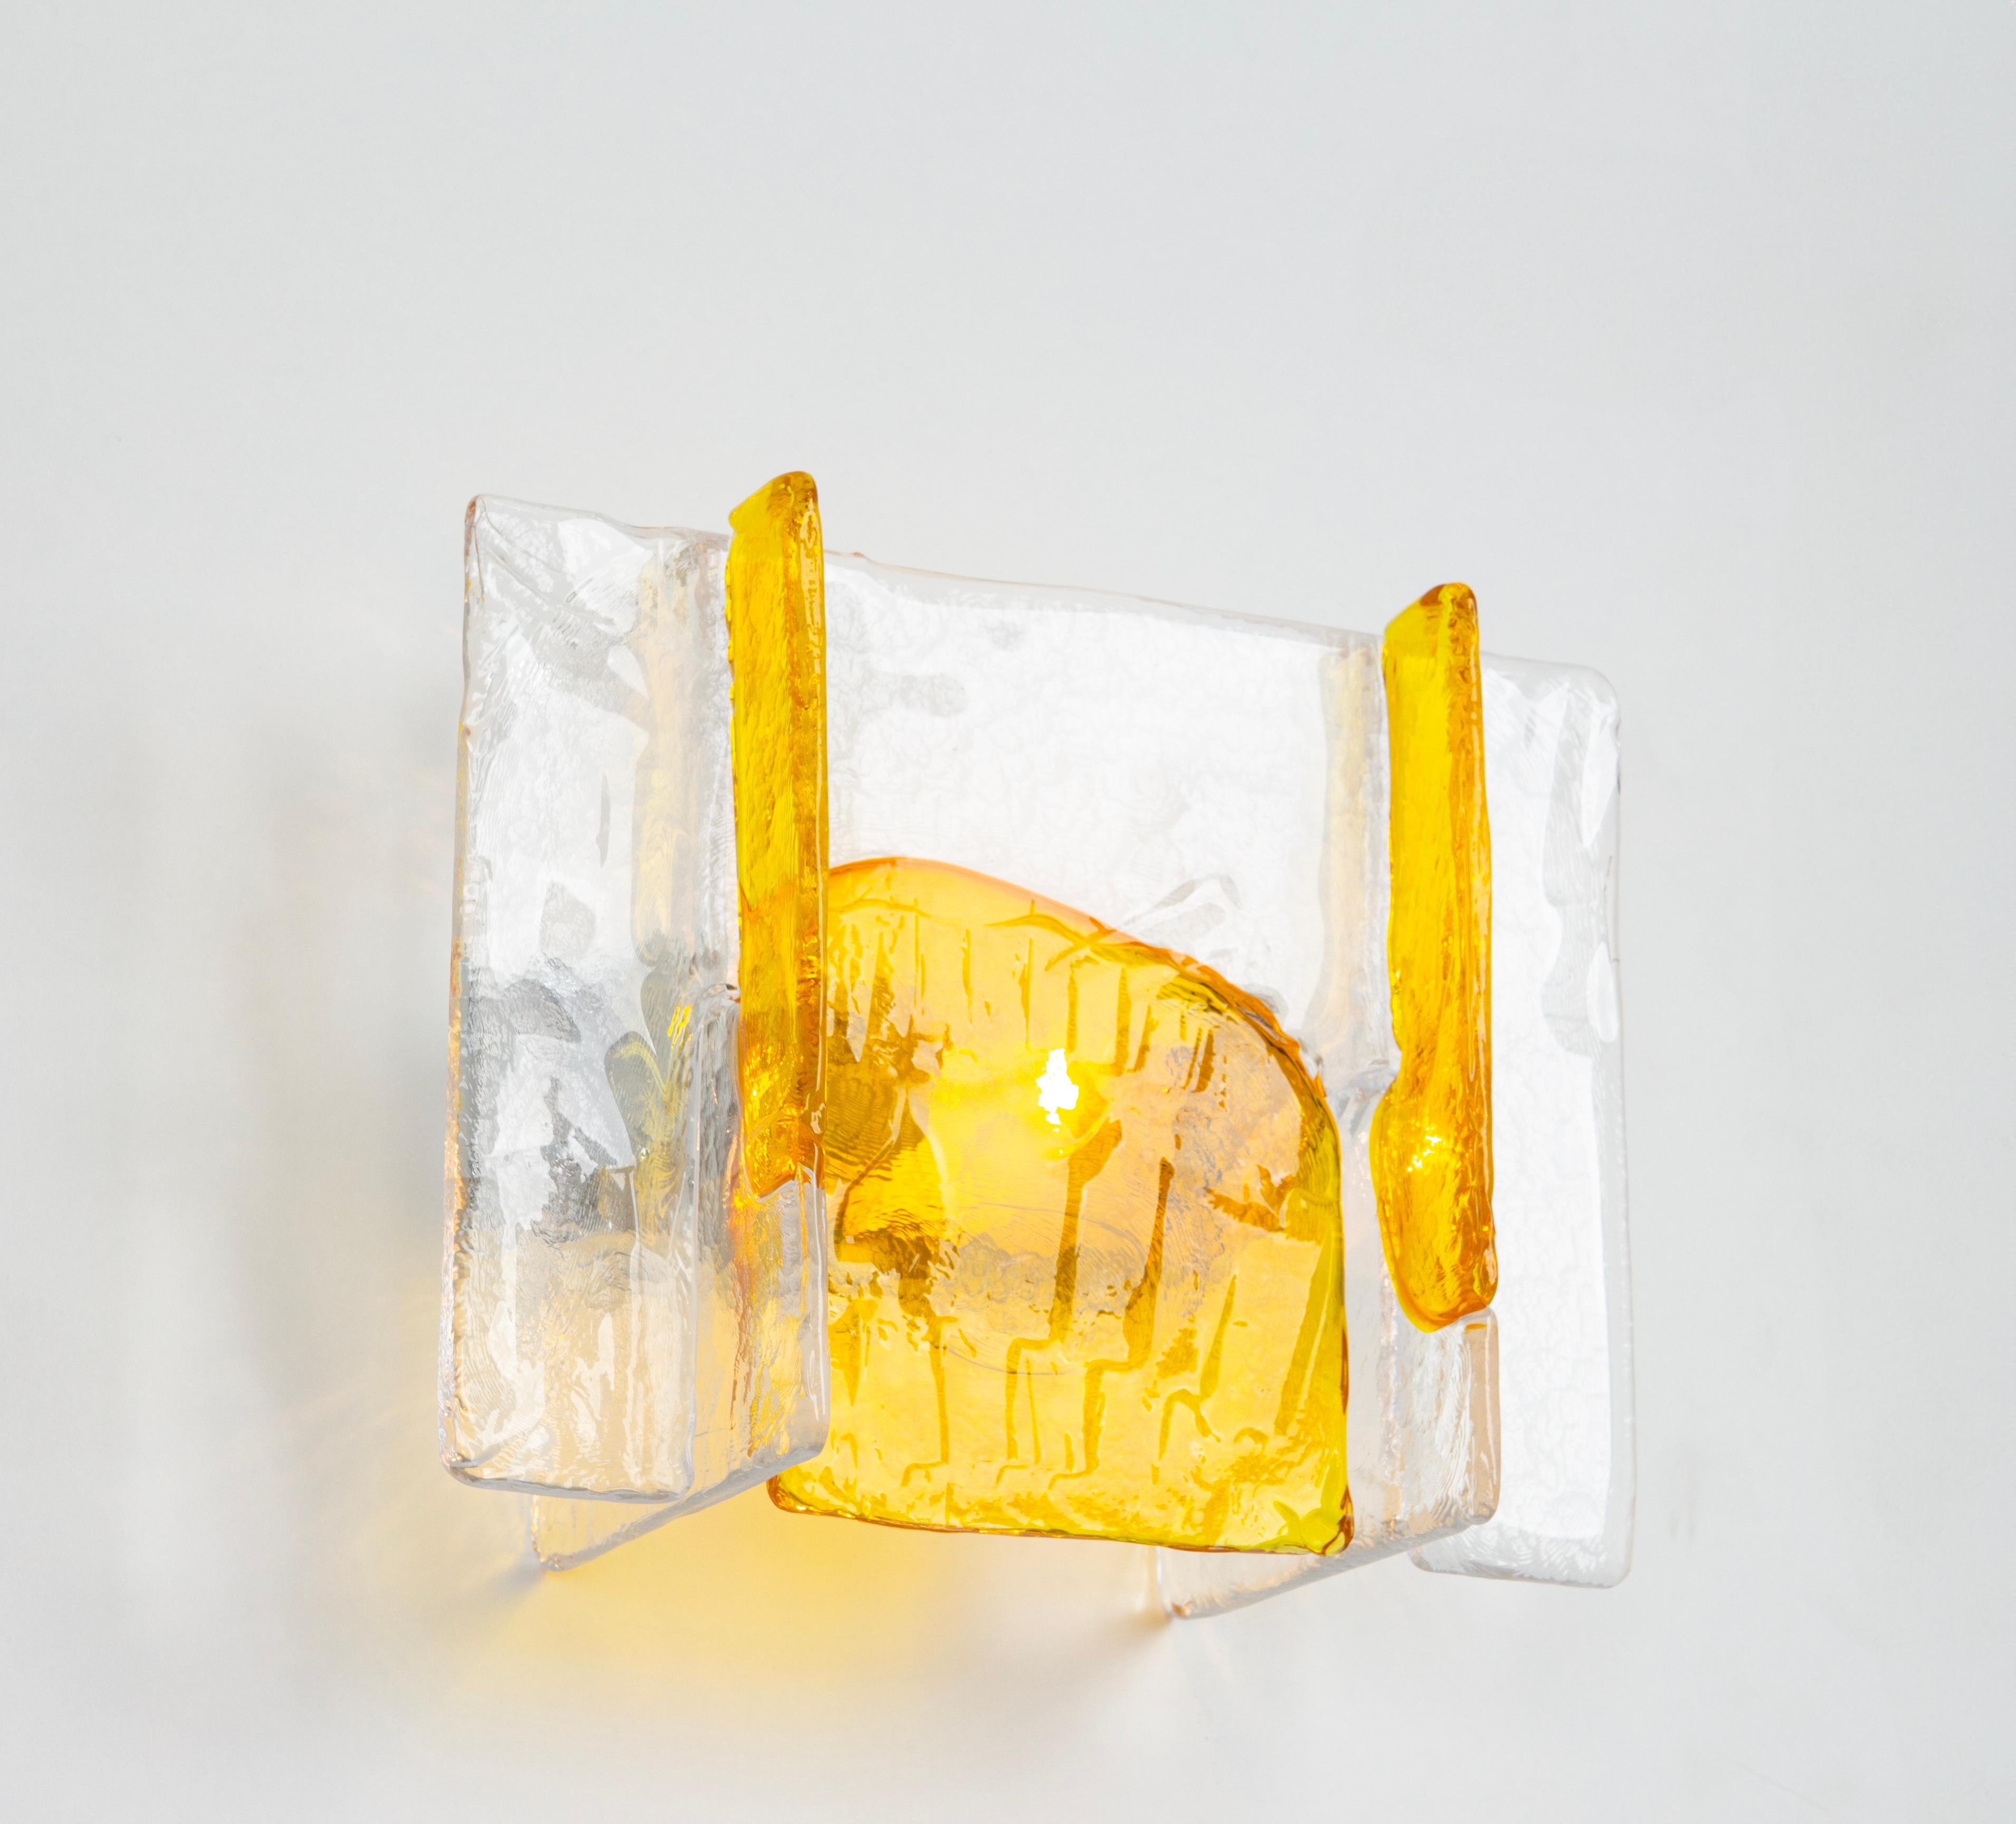 Set of 2 Murano Glass Sconces Wall Lights by Mazzega, Italy, circa 1970s For Sale 1